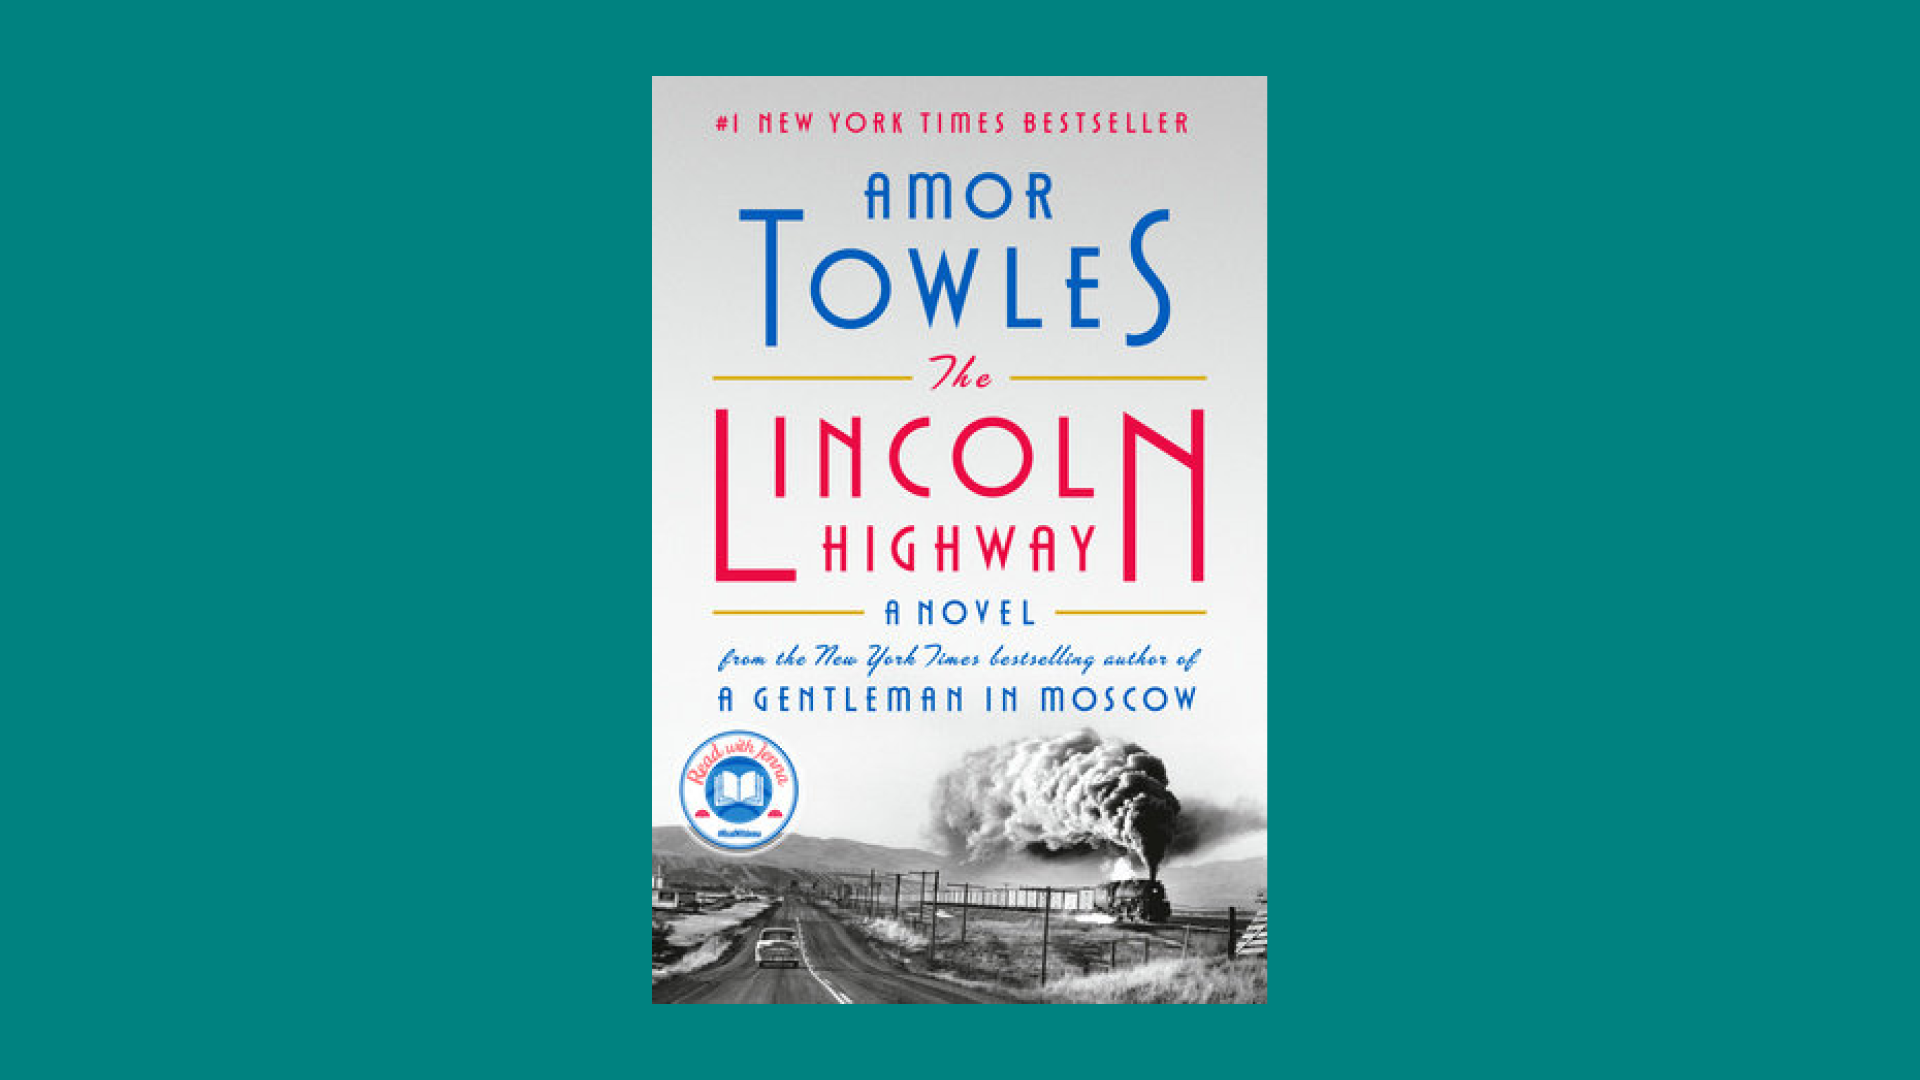 “The Lincoln Highway” by Amor Towles